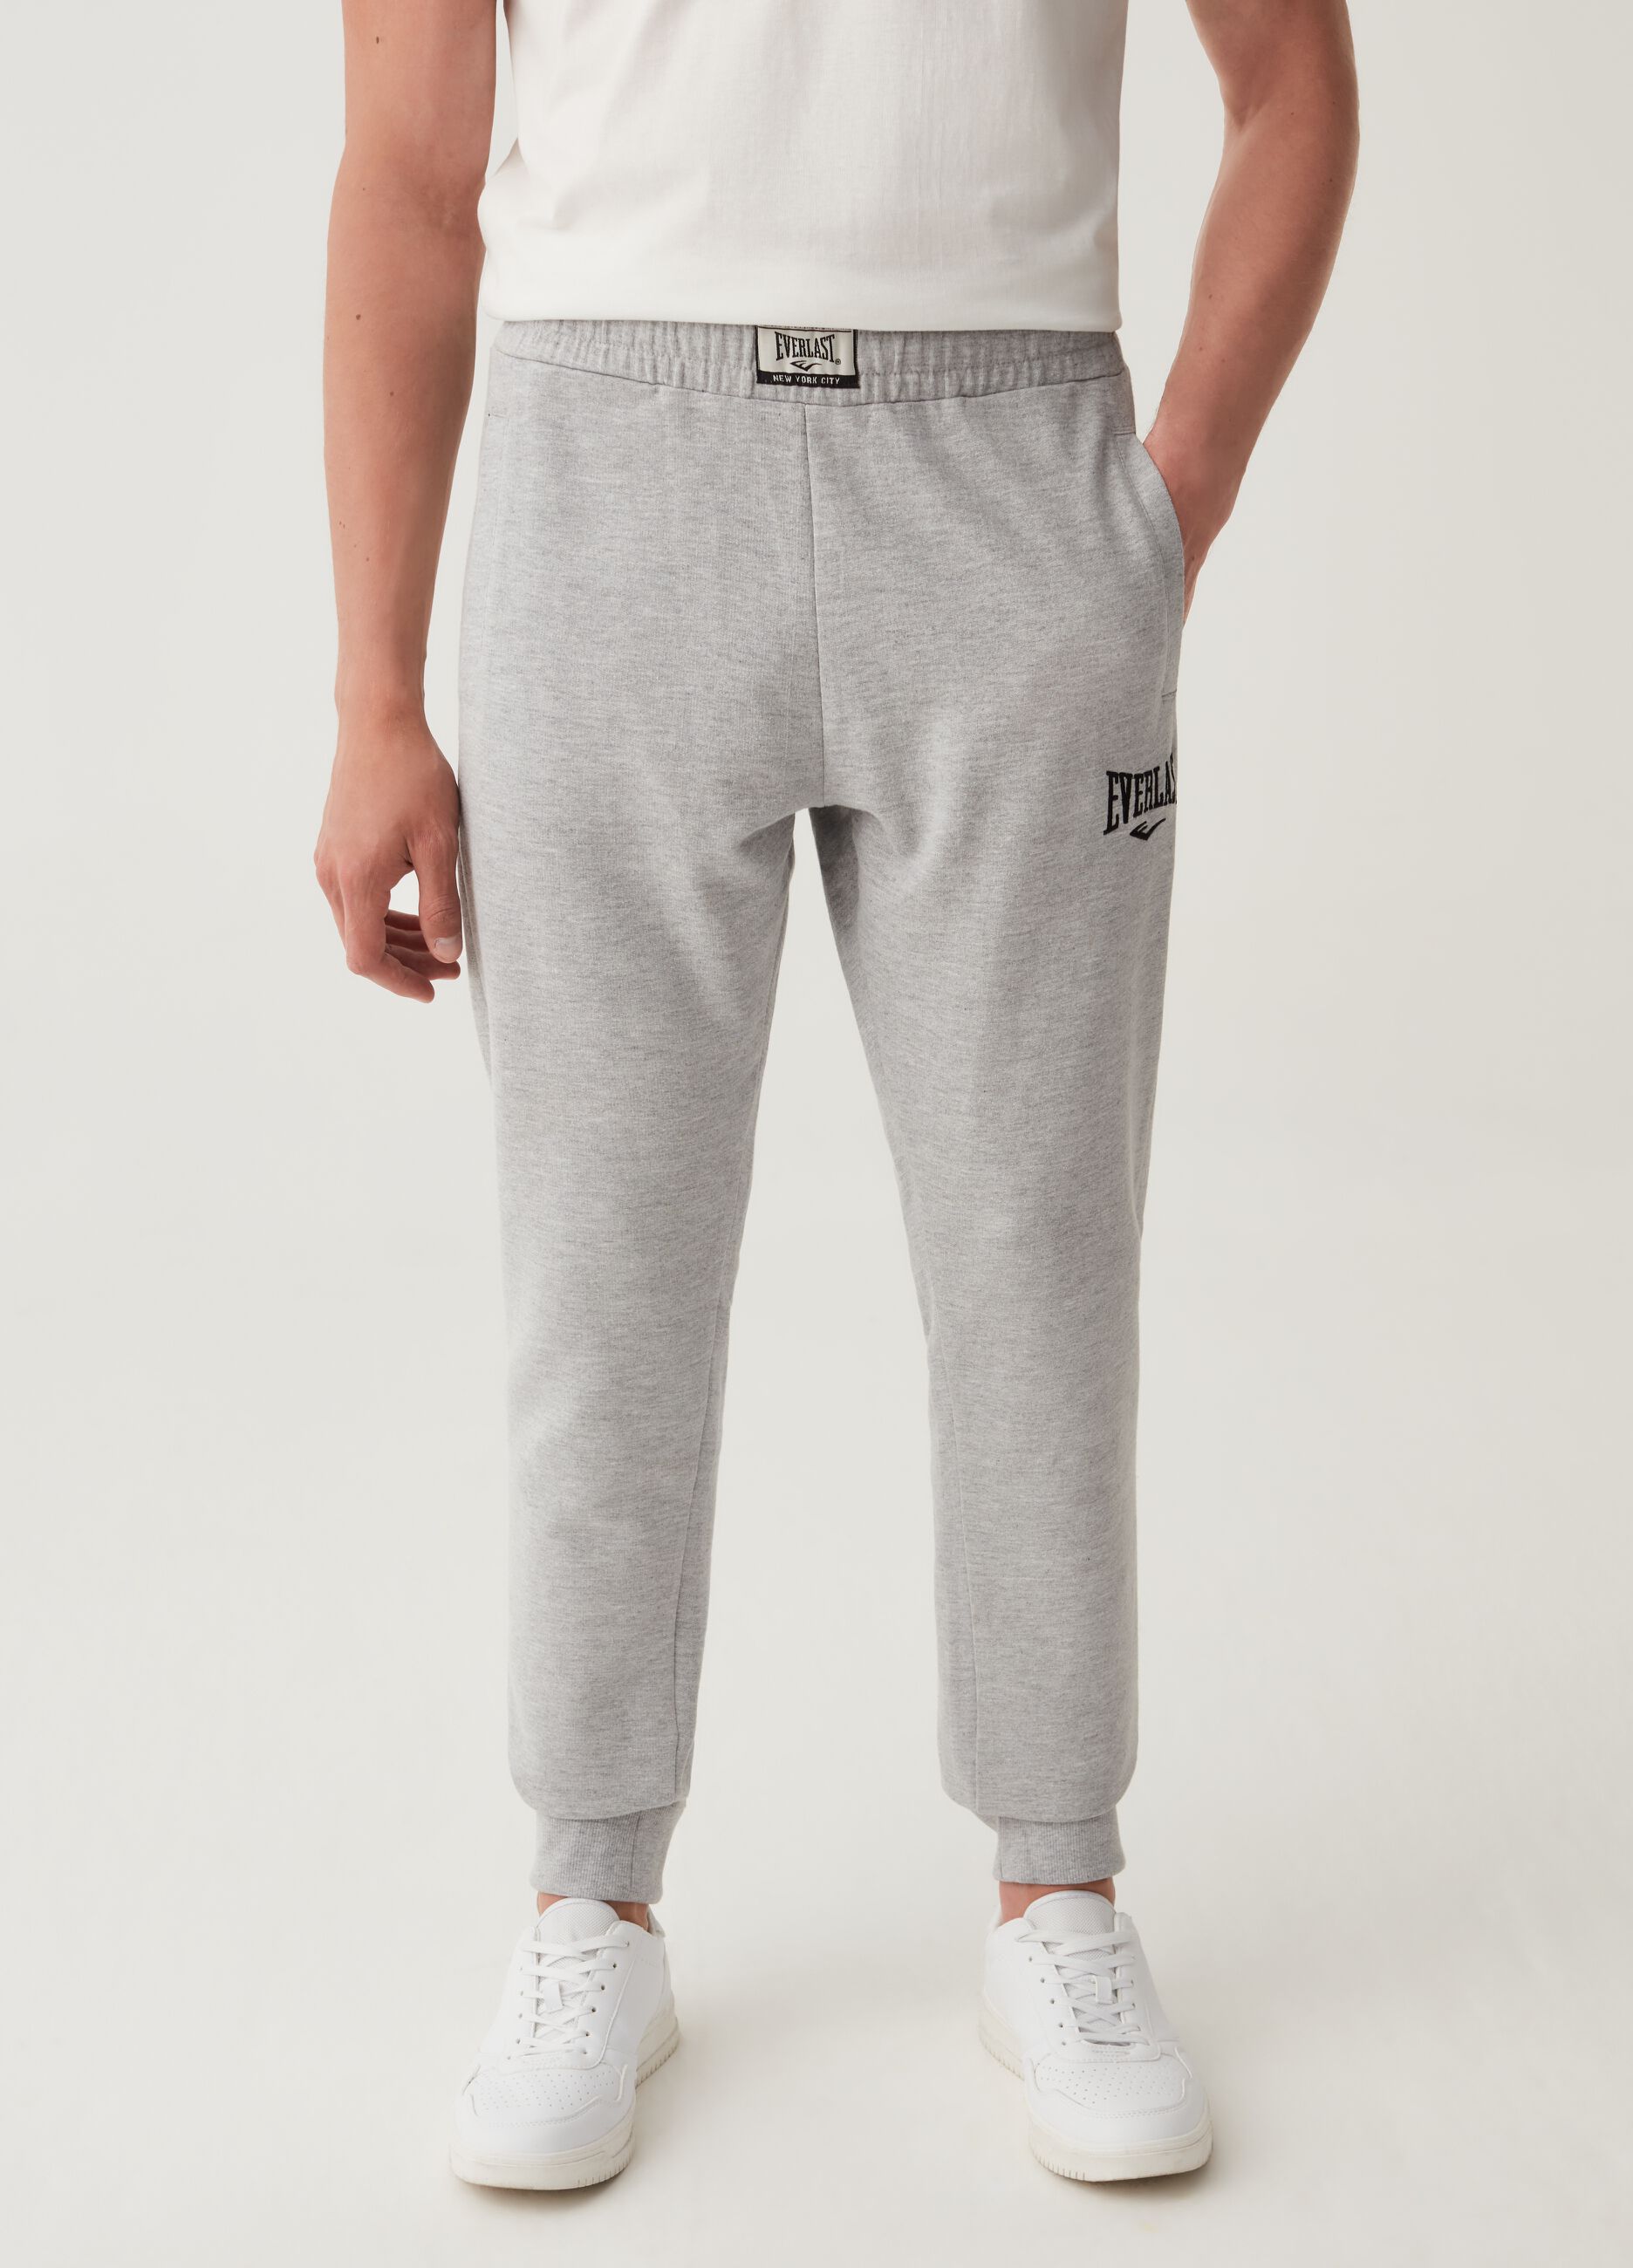 Plush joggers with Everlast embroidery